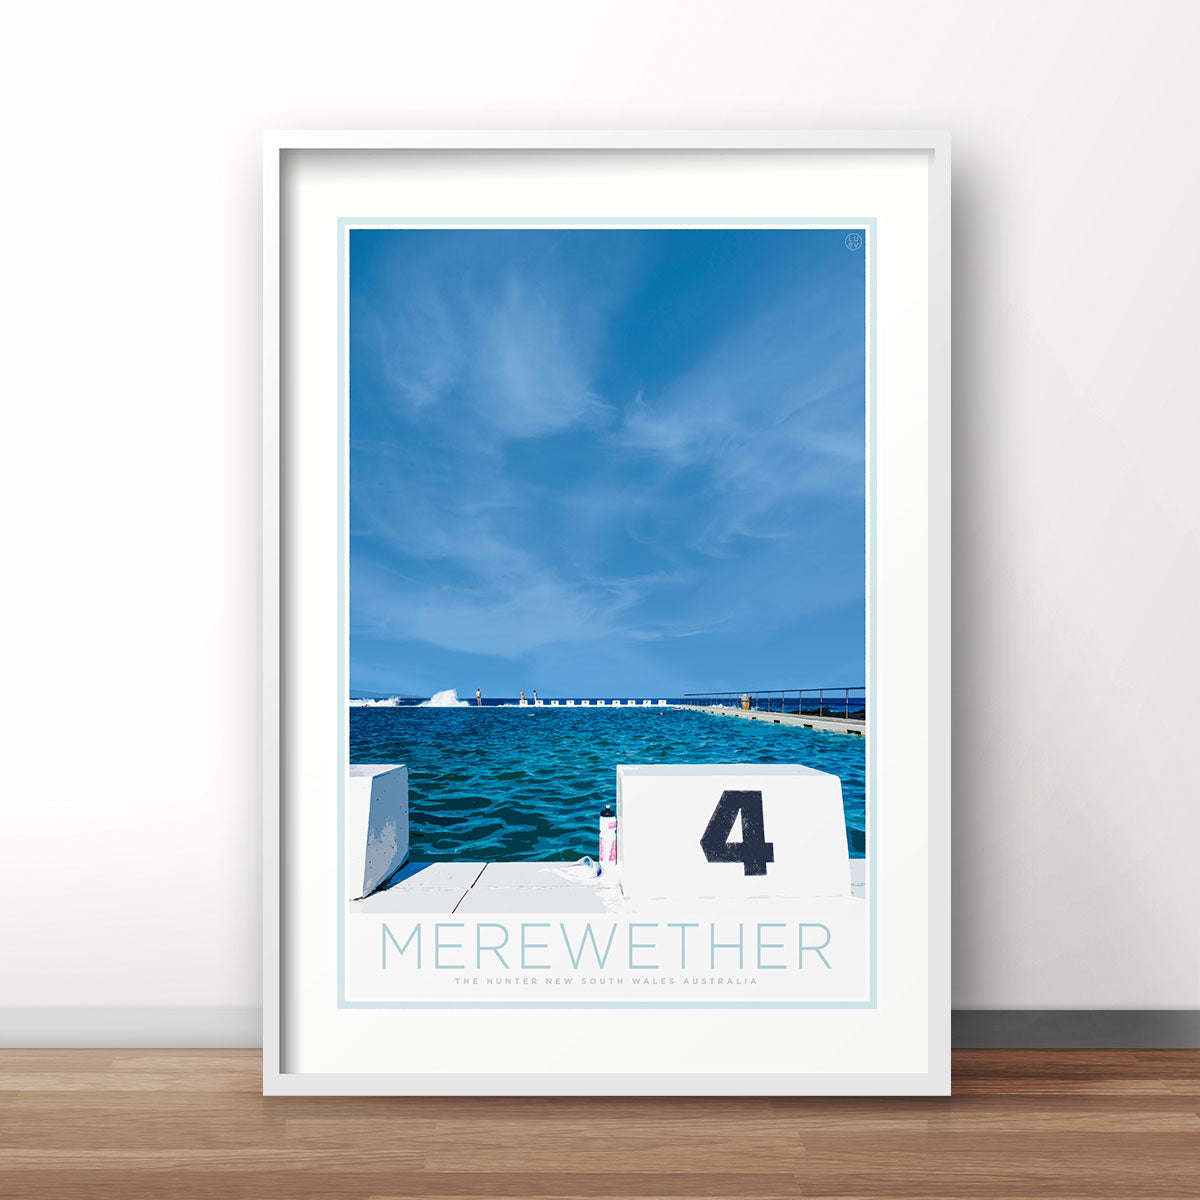 Merewether Pool retro vintage poster print by places we luv